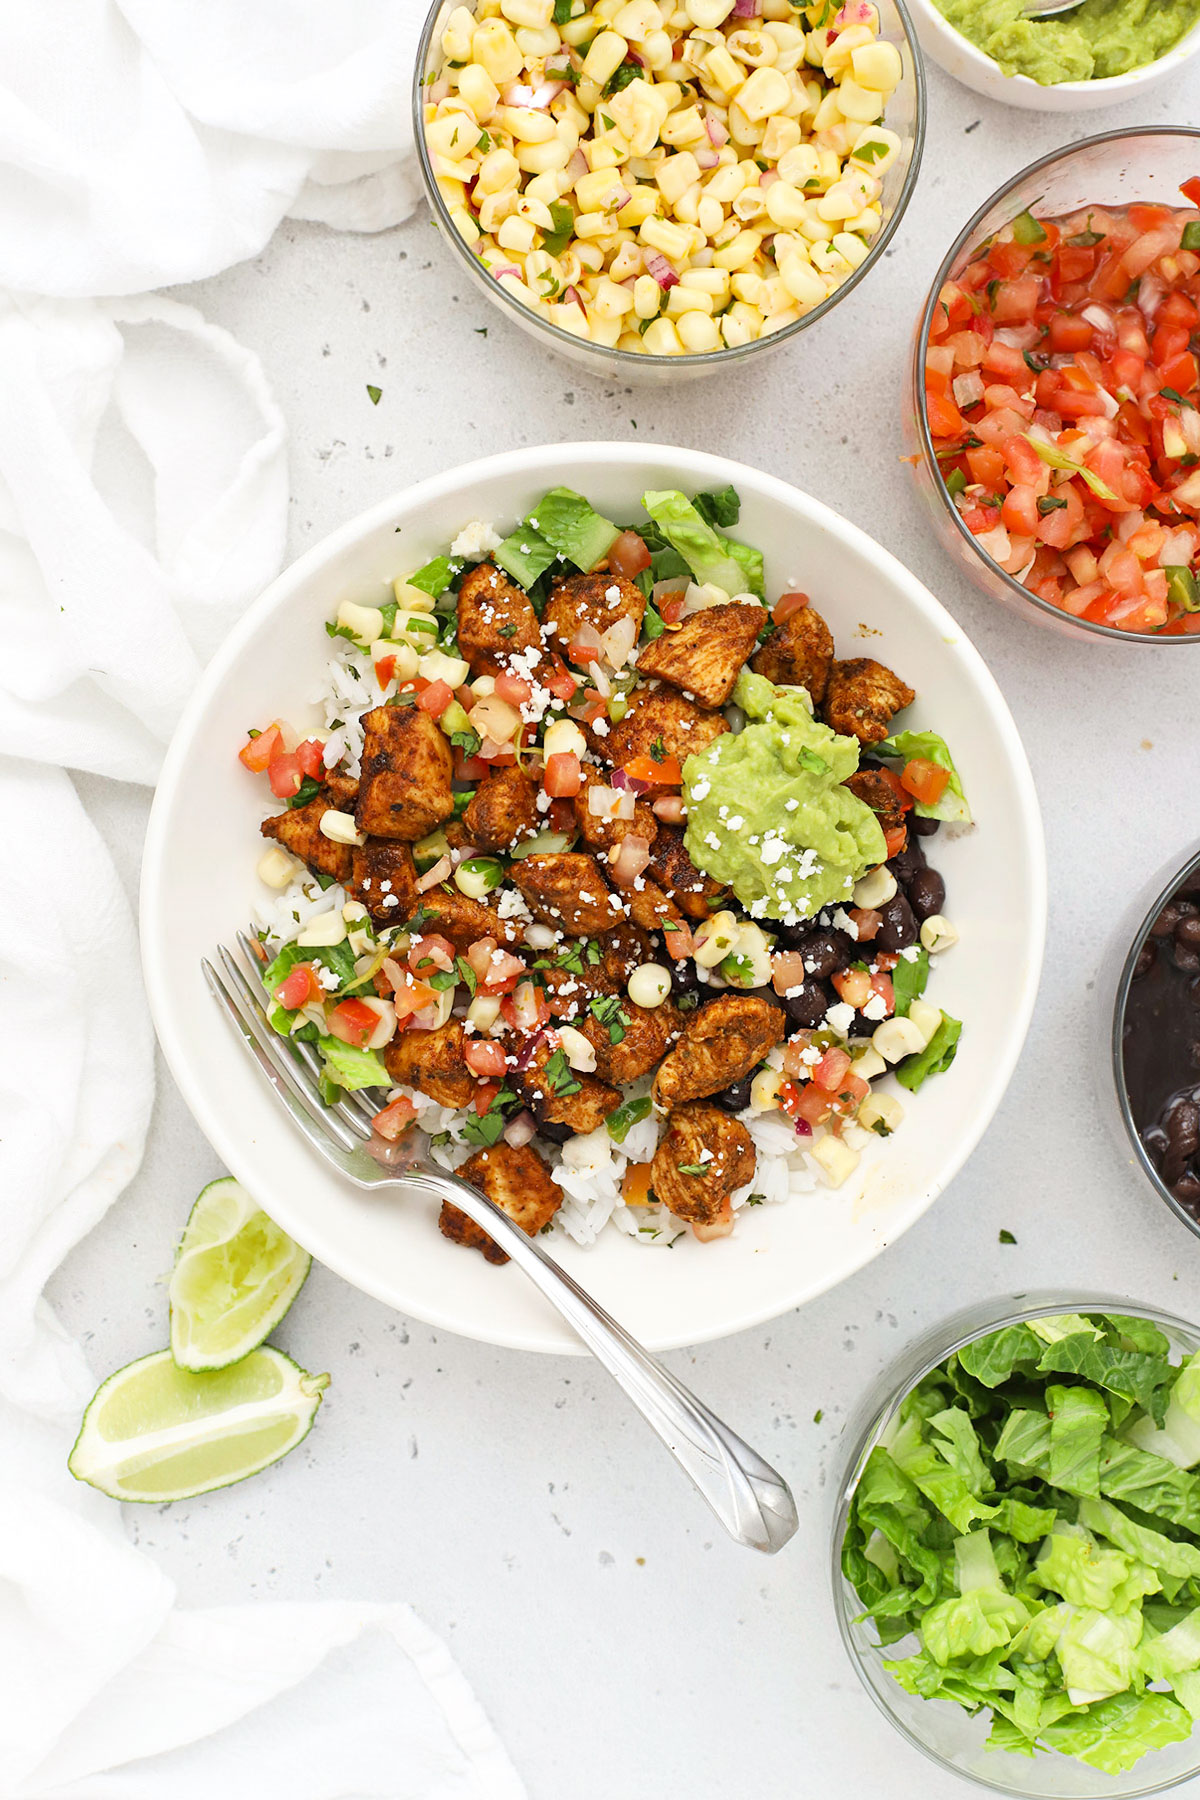 gluten-free chicken burrito bowl with rice, beans, salsa, and guacamole